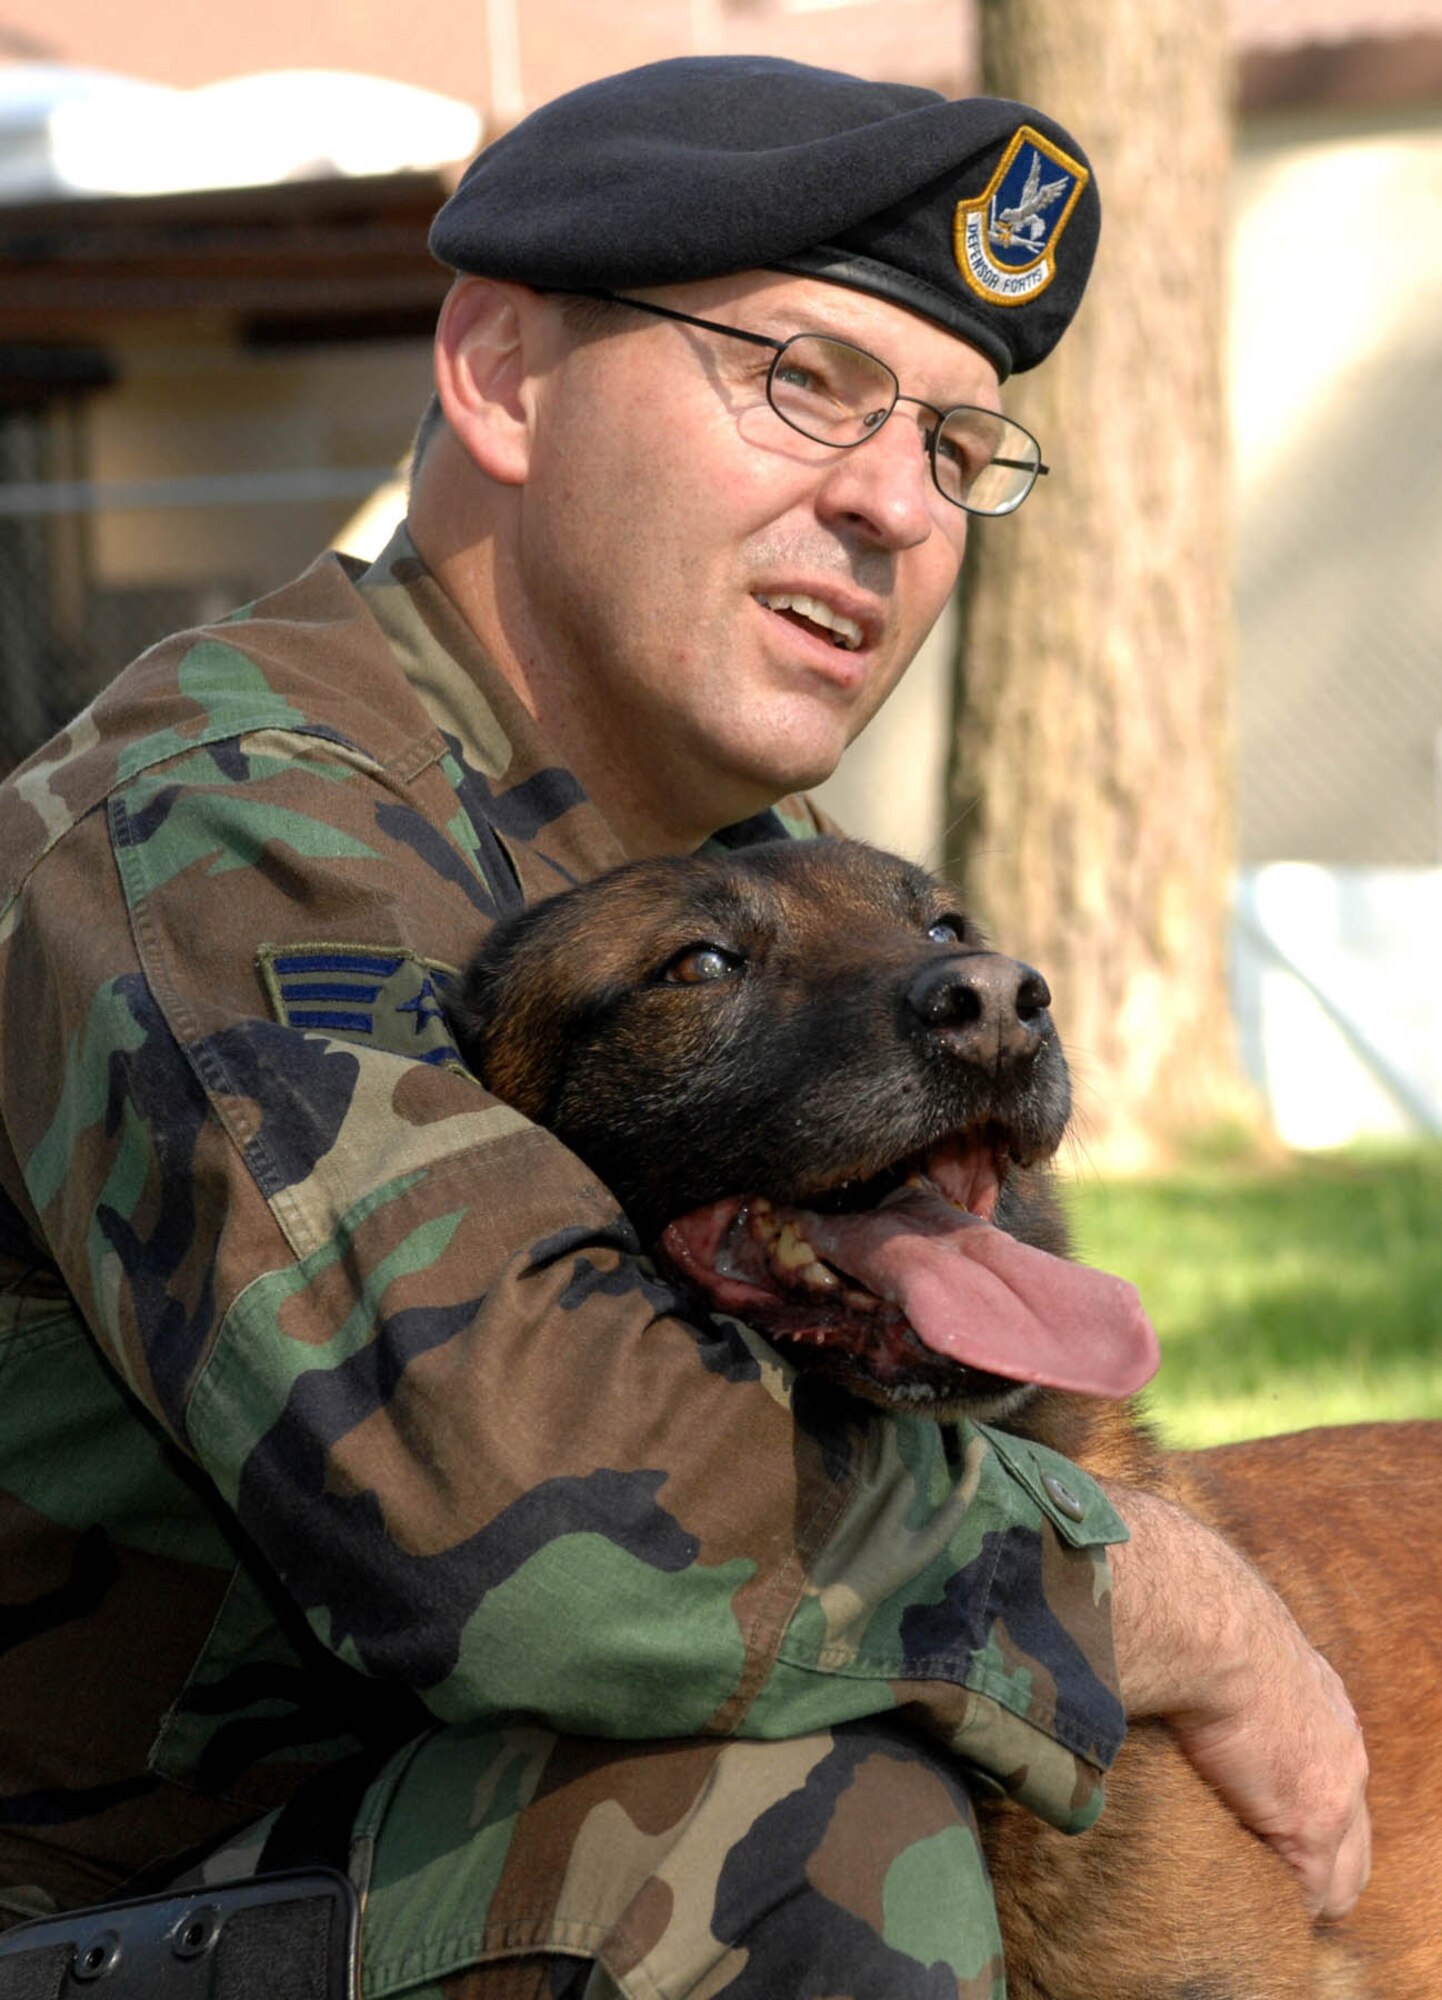 SPANGDAHLEM AIR BASE, GERMANY -- Staff Sgt. Keith Combass, 52nd Security Forces military working dog handler, shows affection to Carlo, a Belgian Malinois MWD, here May 22, 2007. Carlo was one of the first MWD deployed to Iraq in support of Operation Iraqi Freedom. (U.S. Air Force photo/Airman 1st Class Stephanie Clark) 